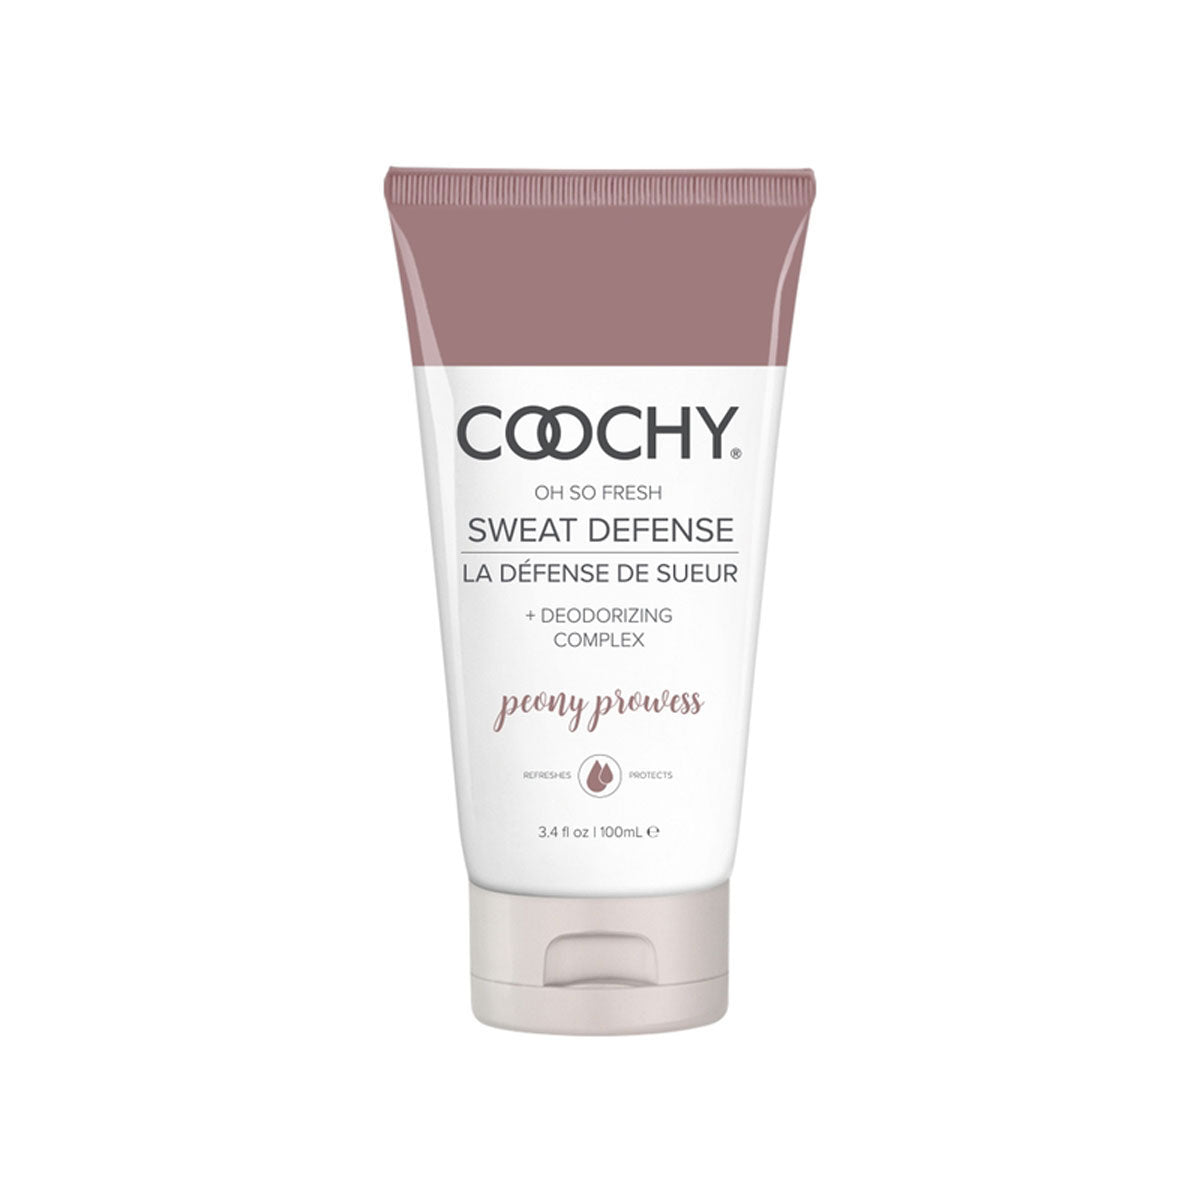 Coochy Sweat Defense Protection Lotion 3.4oz - Peony Prowess